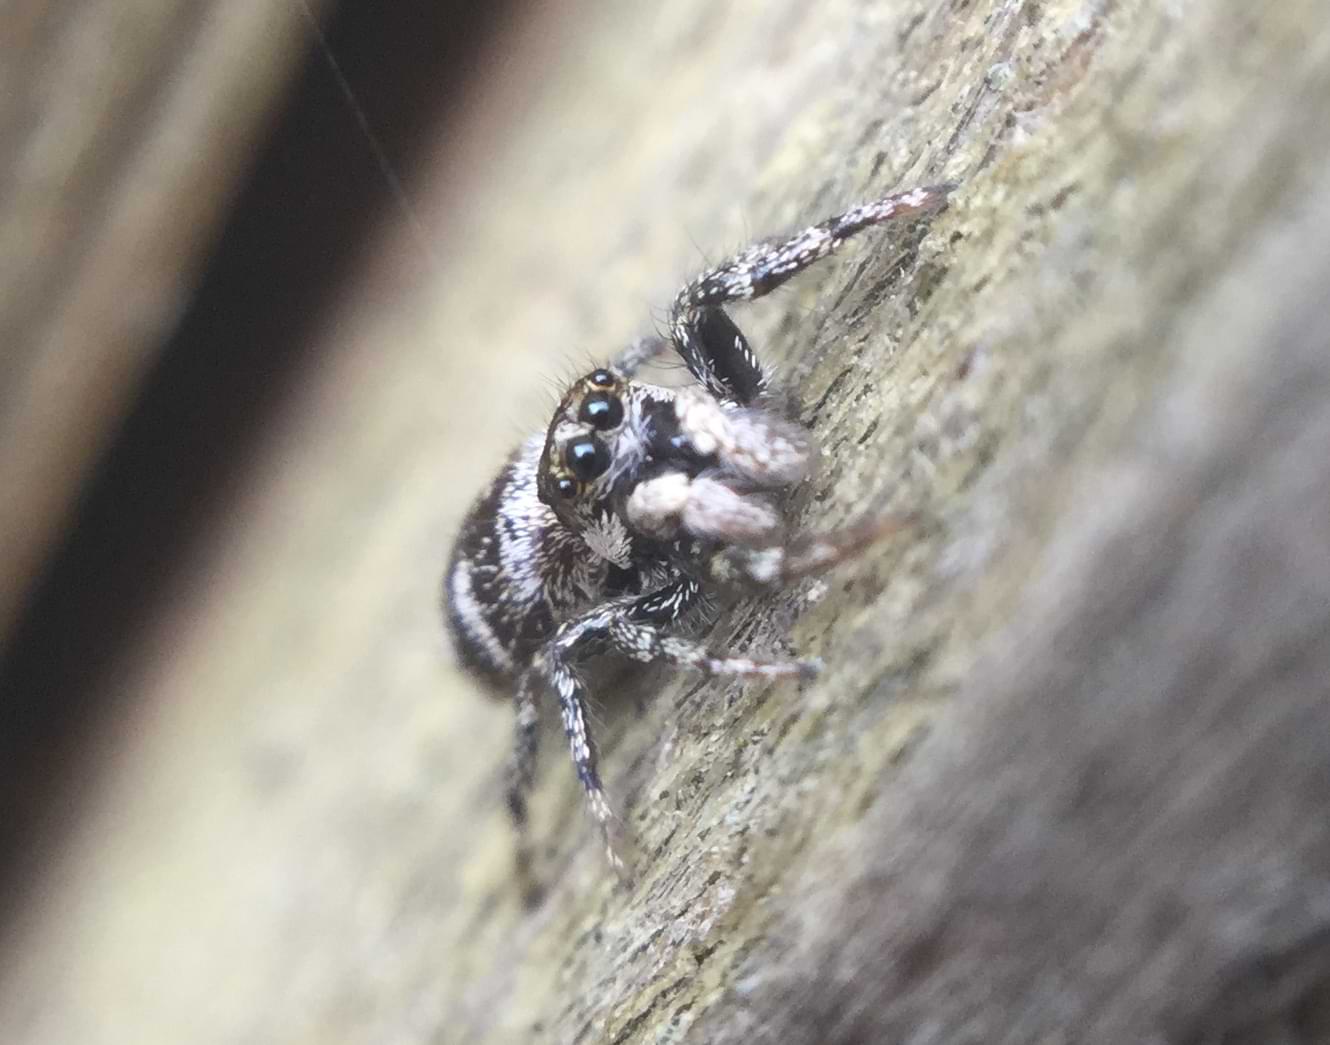 Photo of a black and white striped jumping spider with its face pointing to the camera.